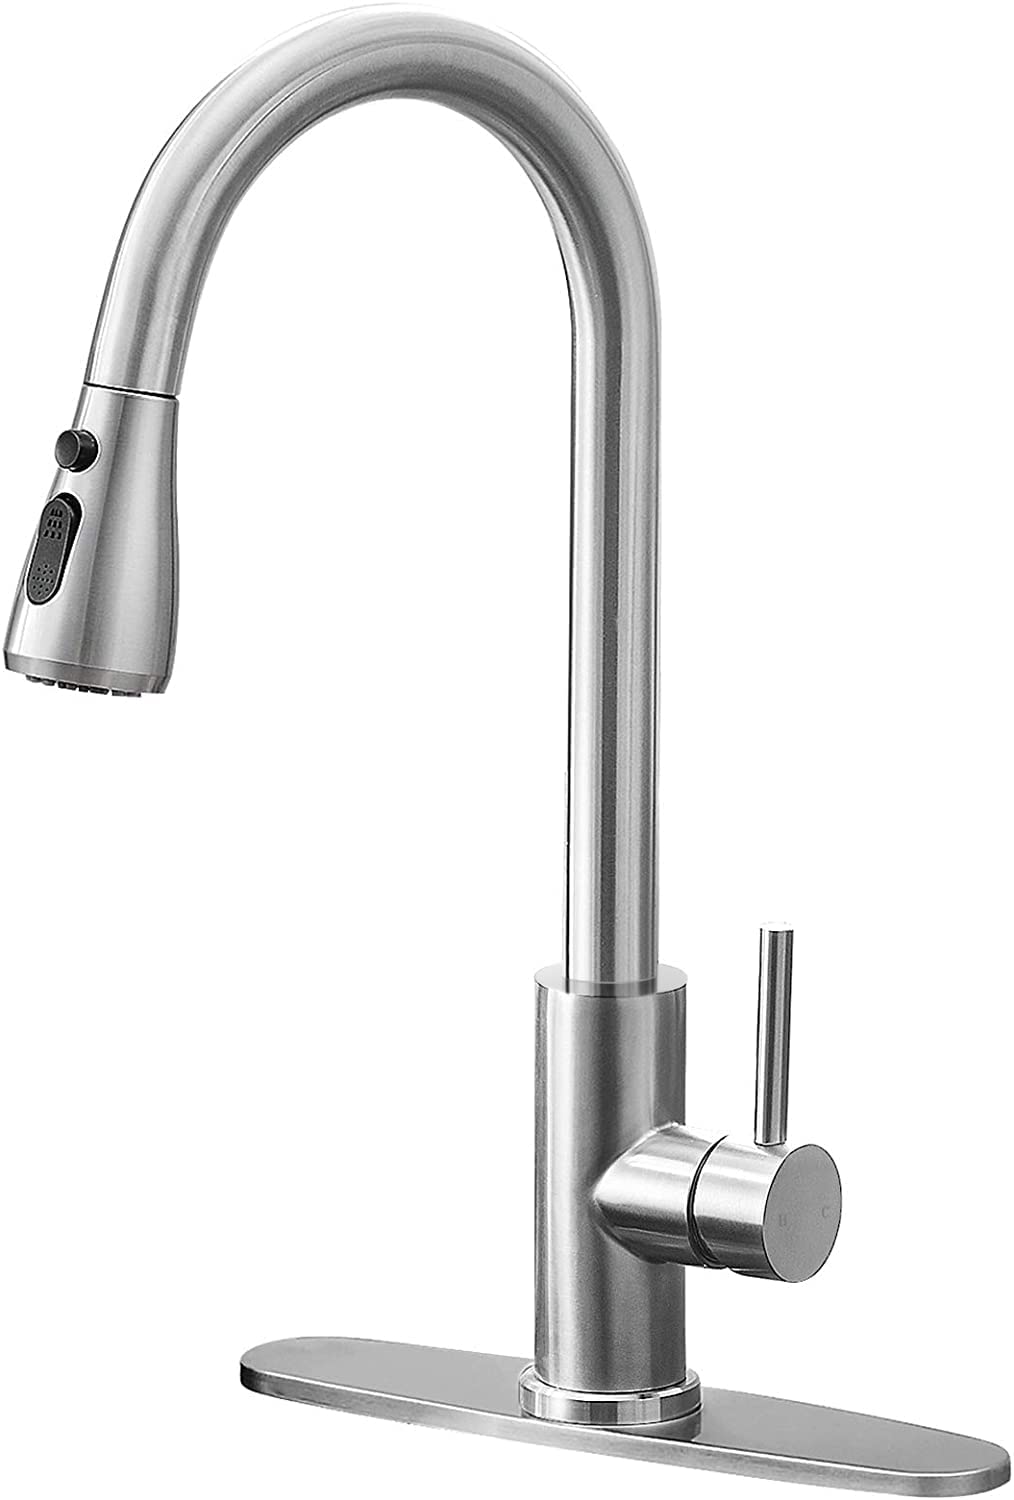 Qomolangma Kitchen Faucet with Pull Down Sprayer, [...]